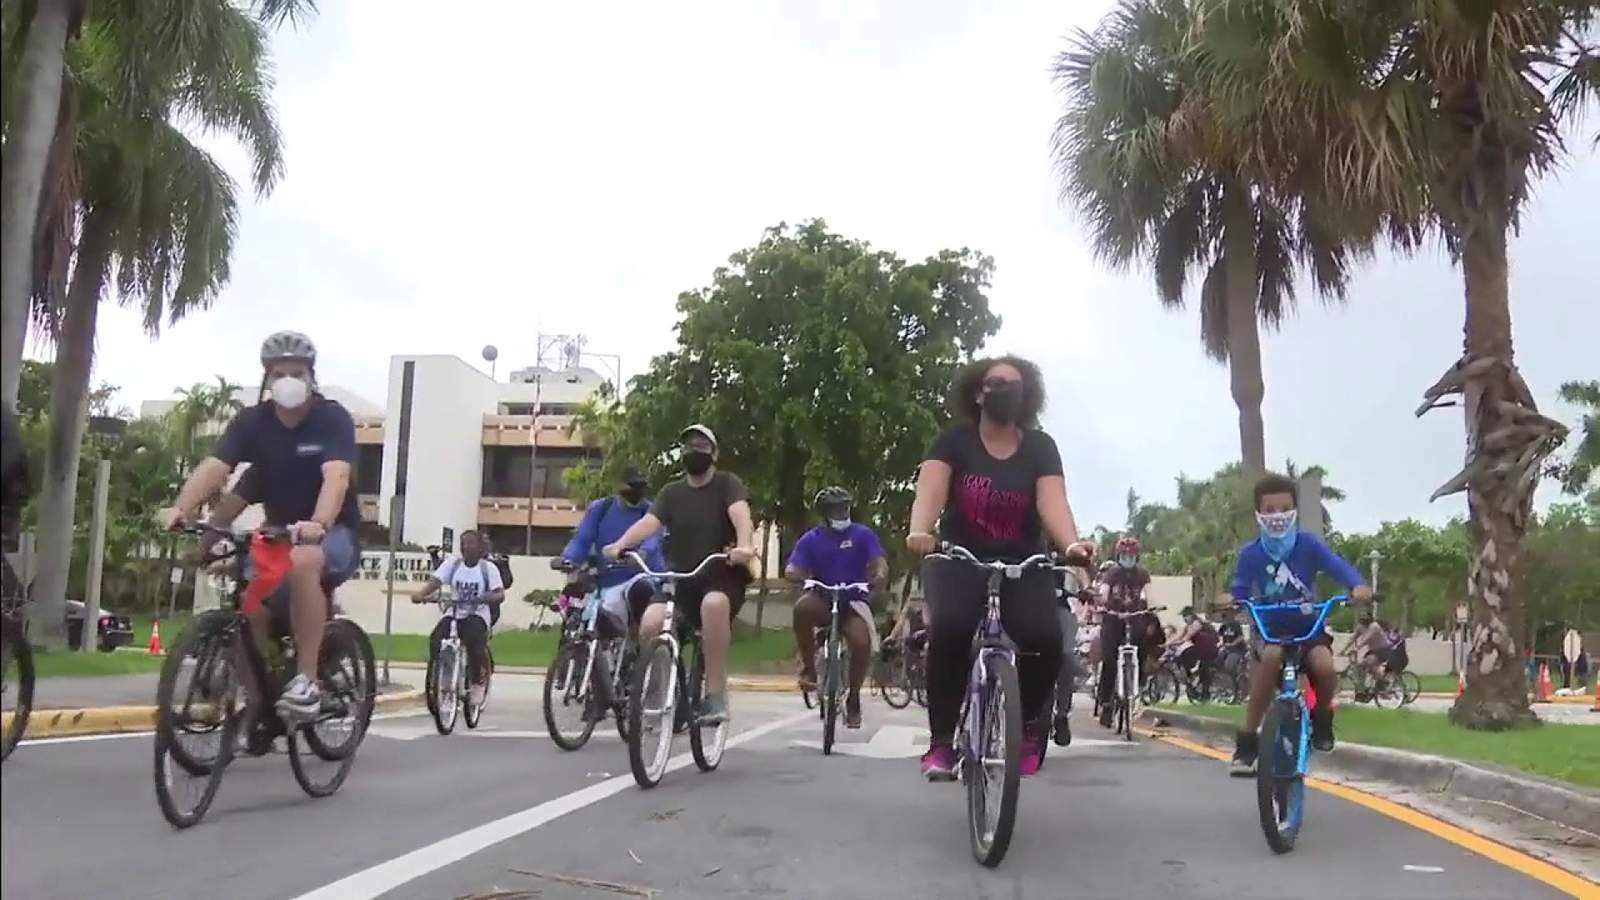 Bicycle riders hold peaceful protest on two wheels in South Miami-Dade